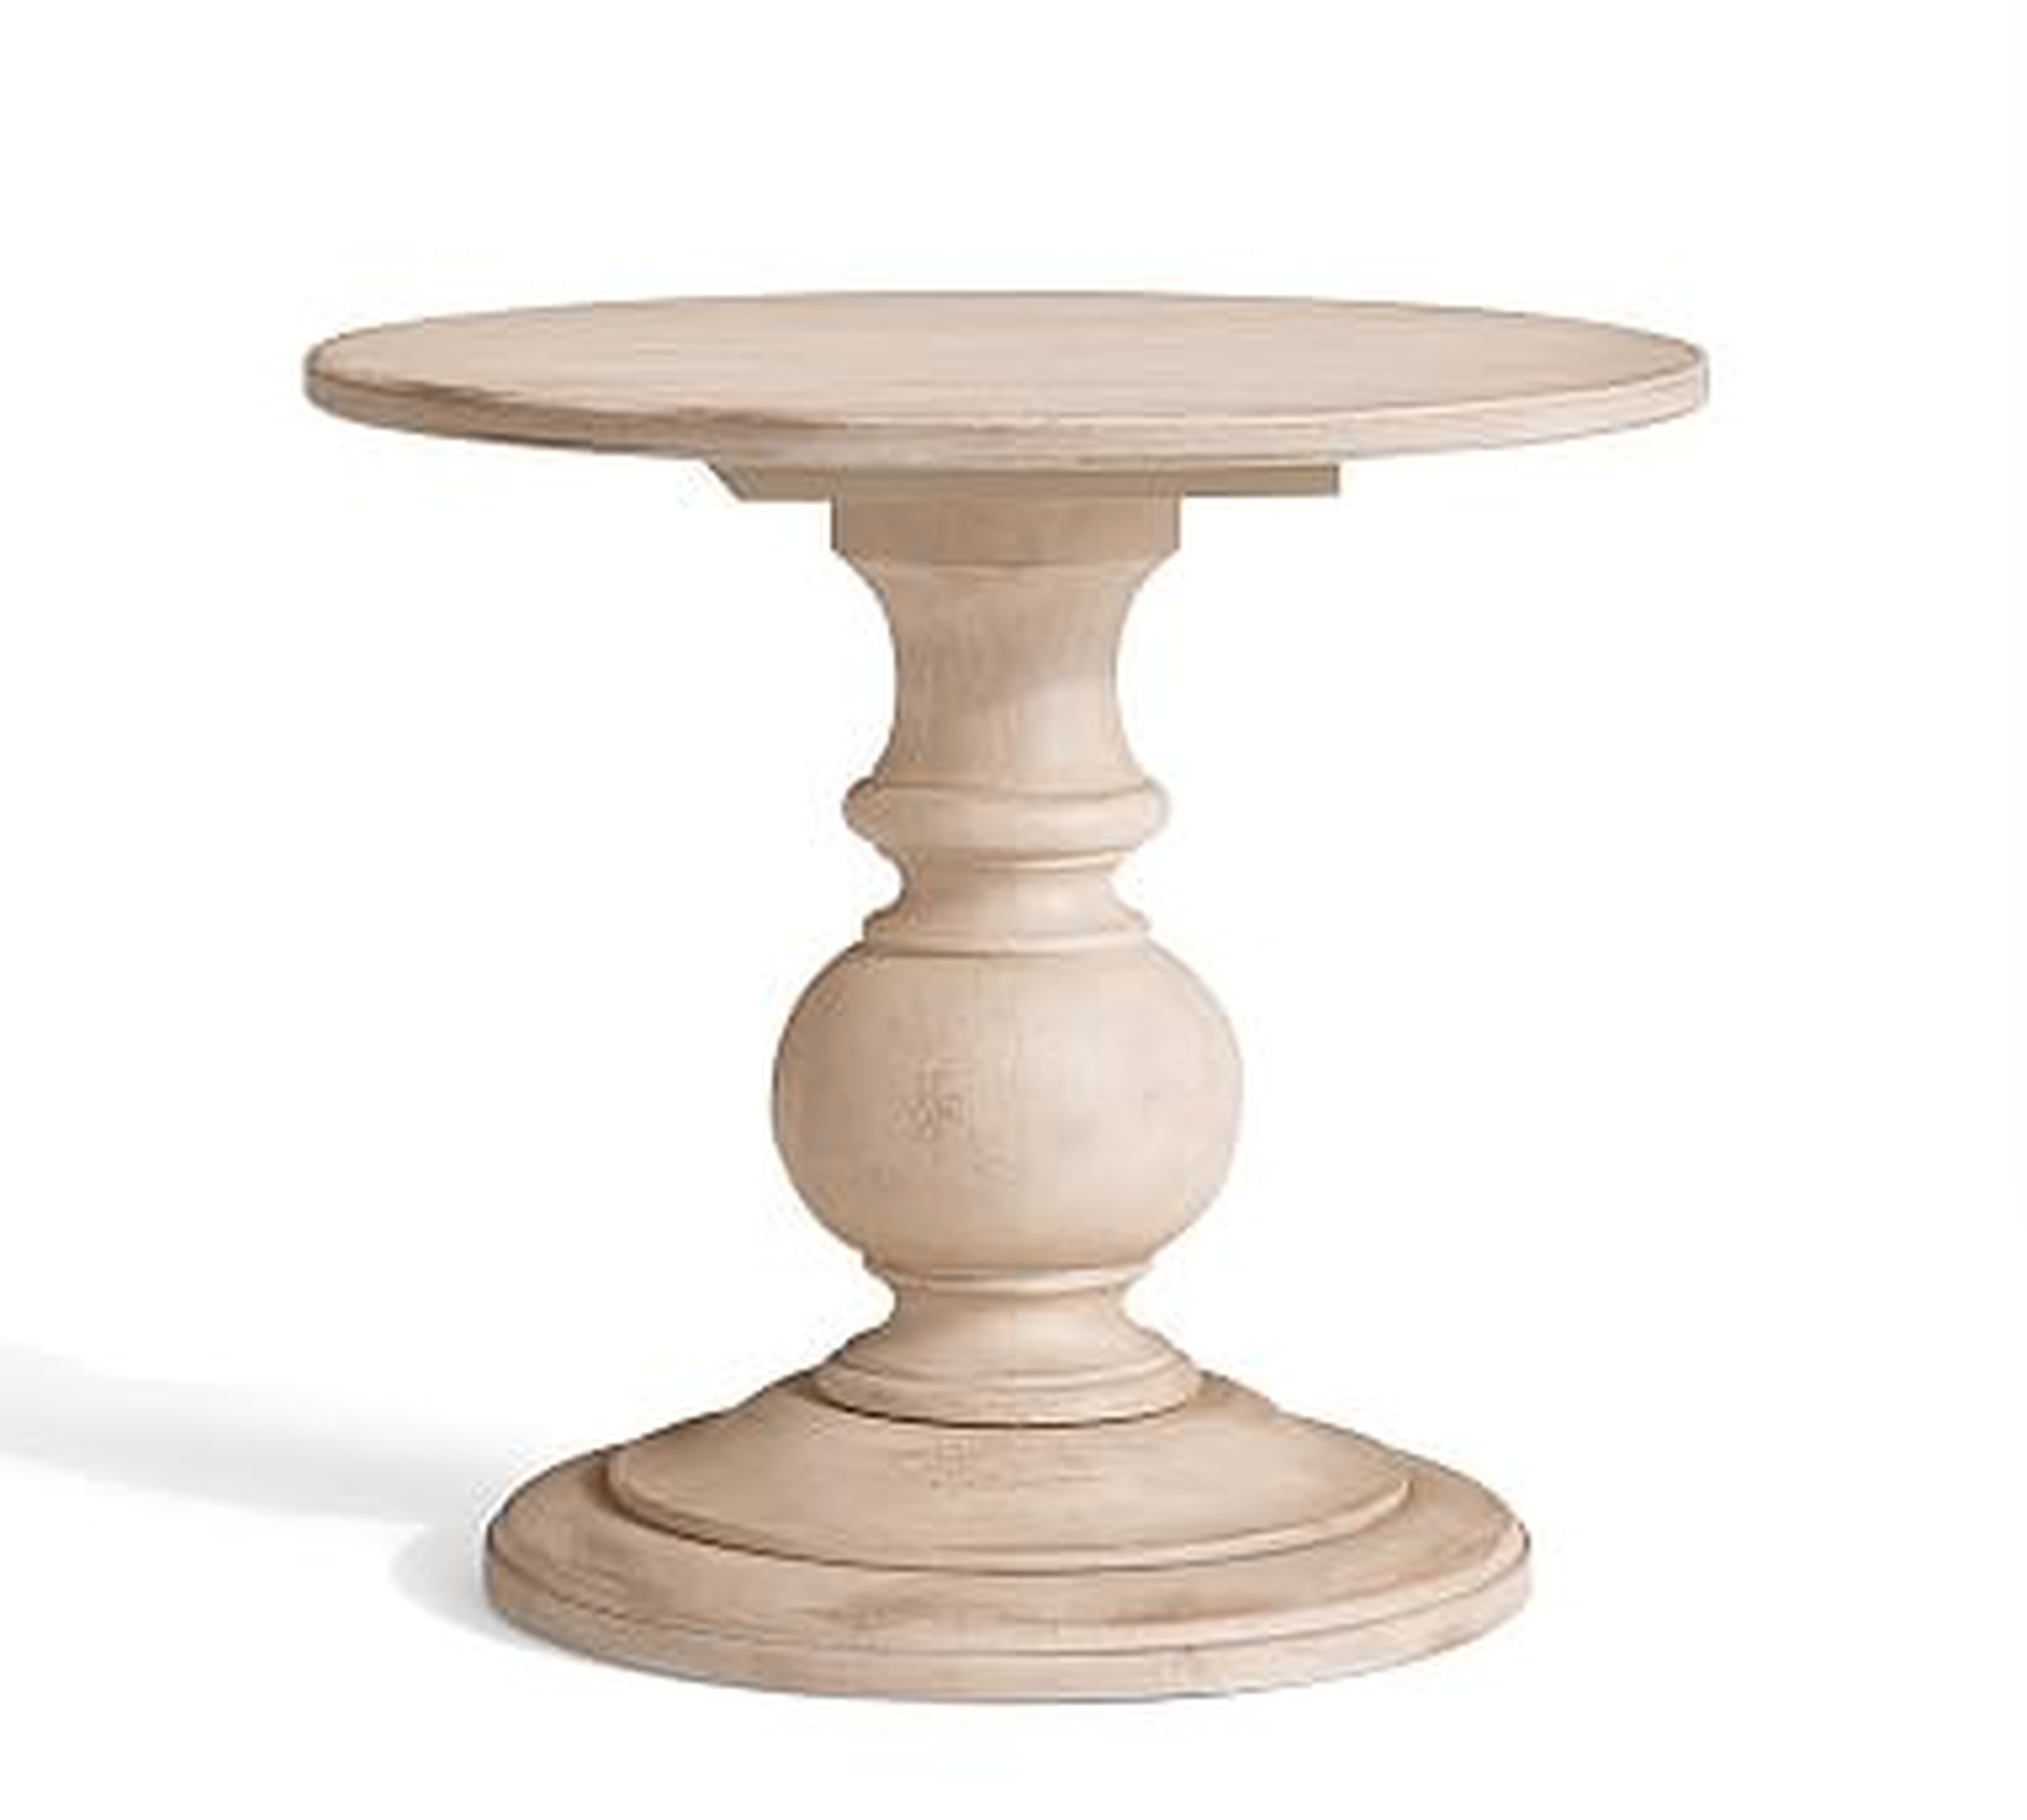 Dawson Wood Pedestal Side Table, Weathered White - Pottery Barn